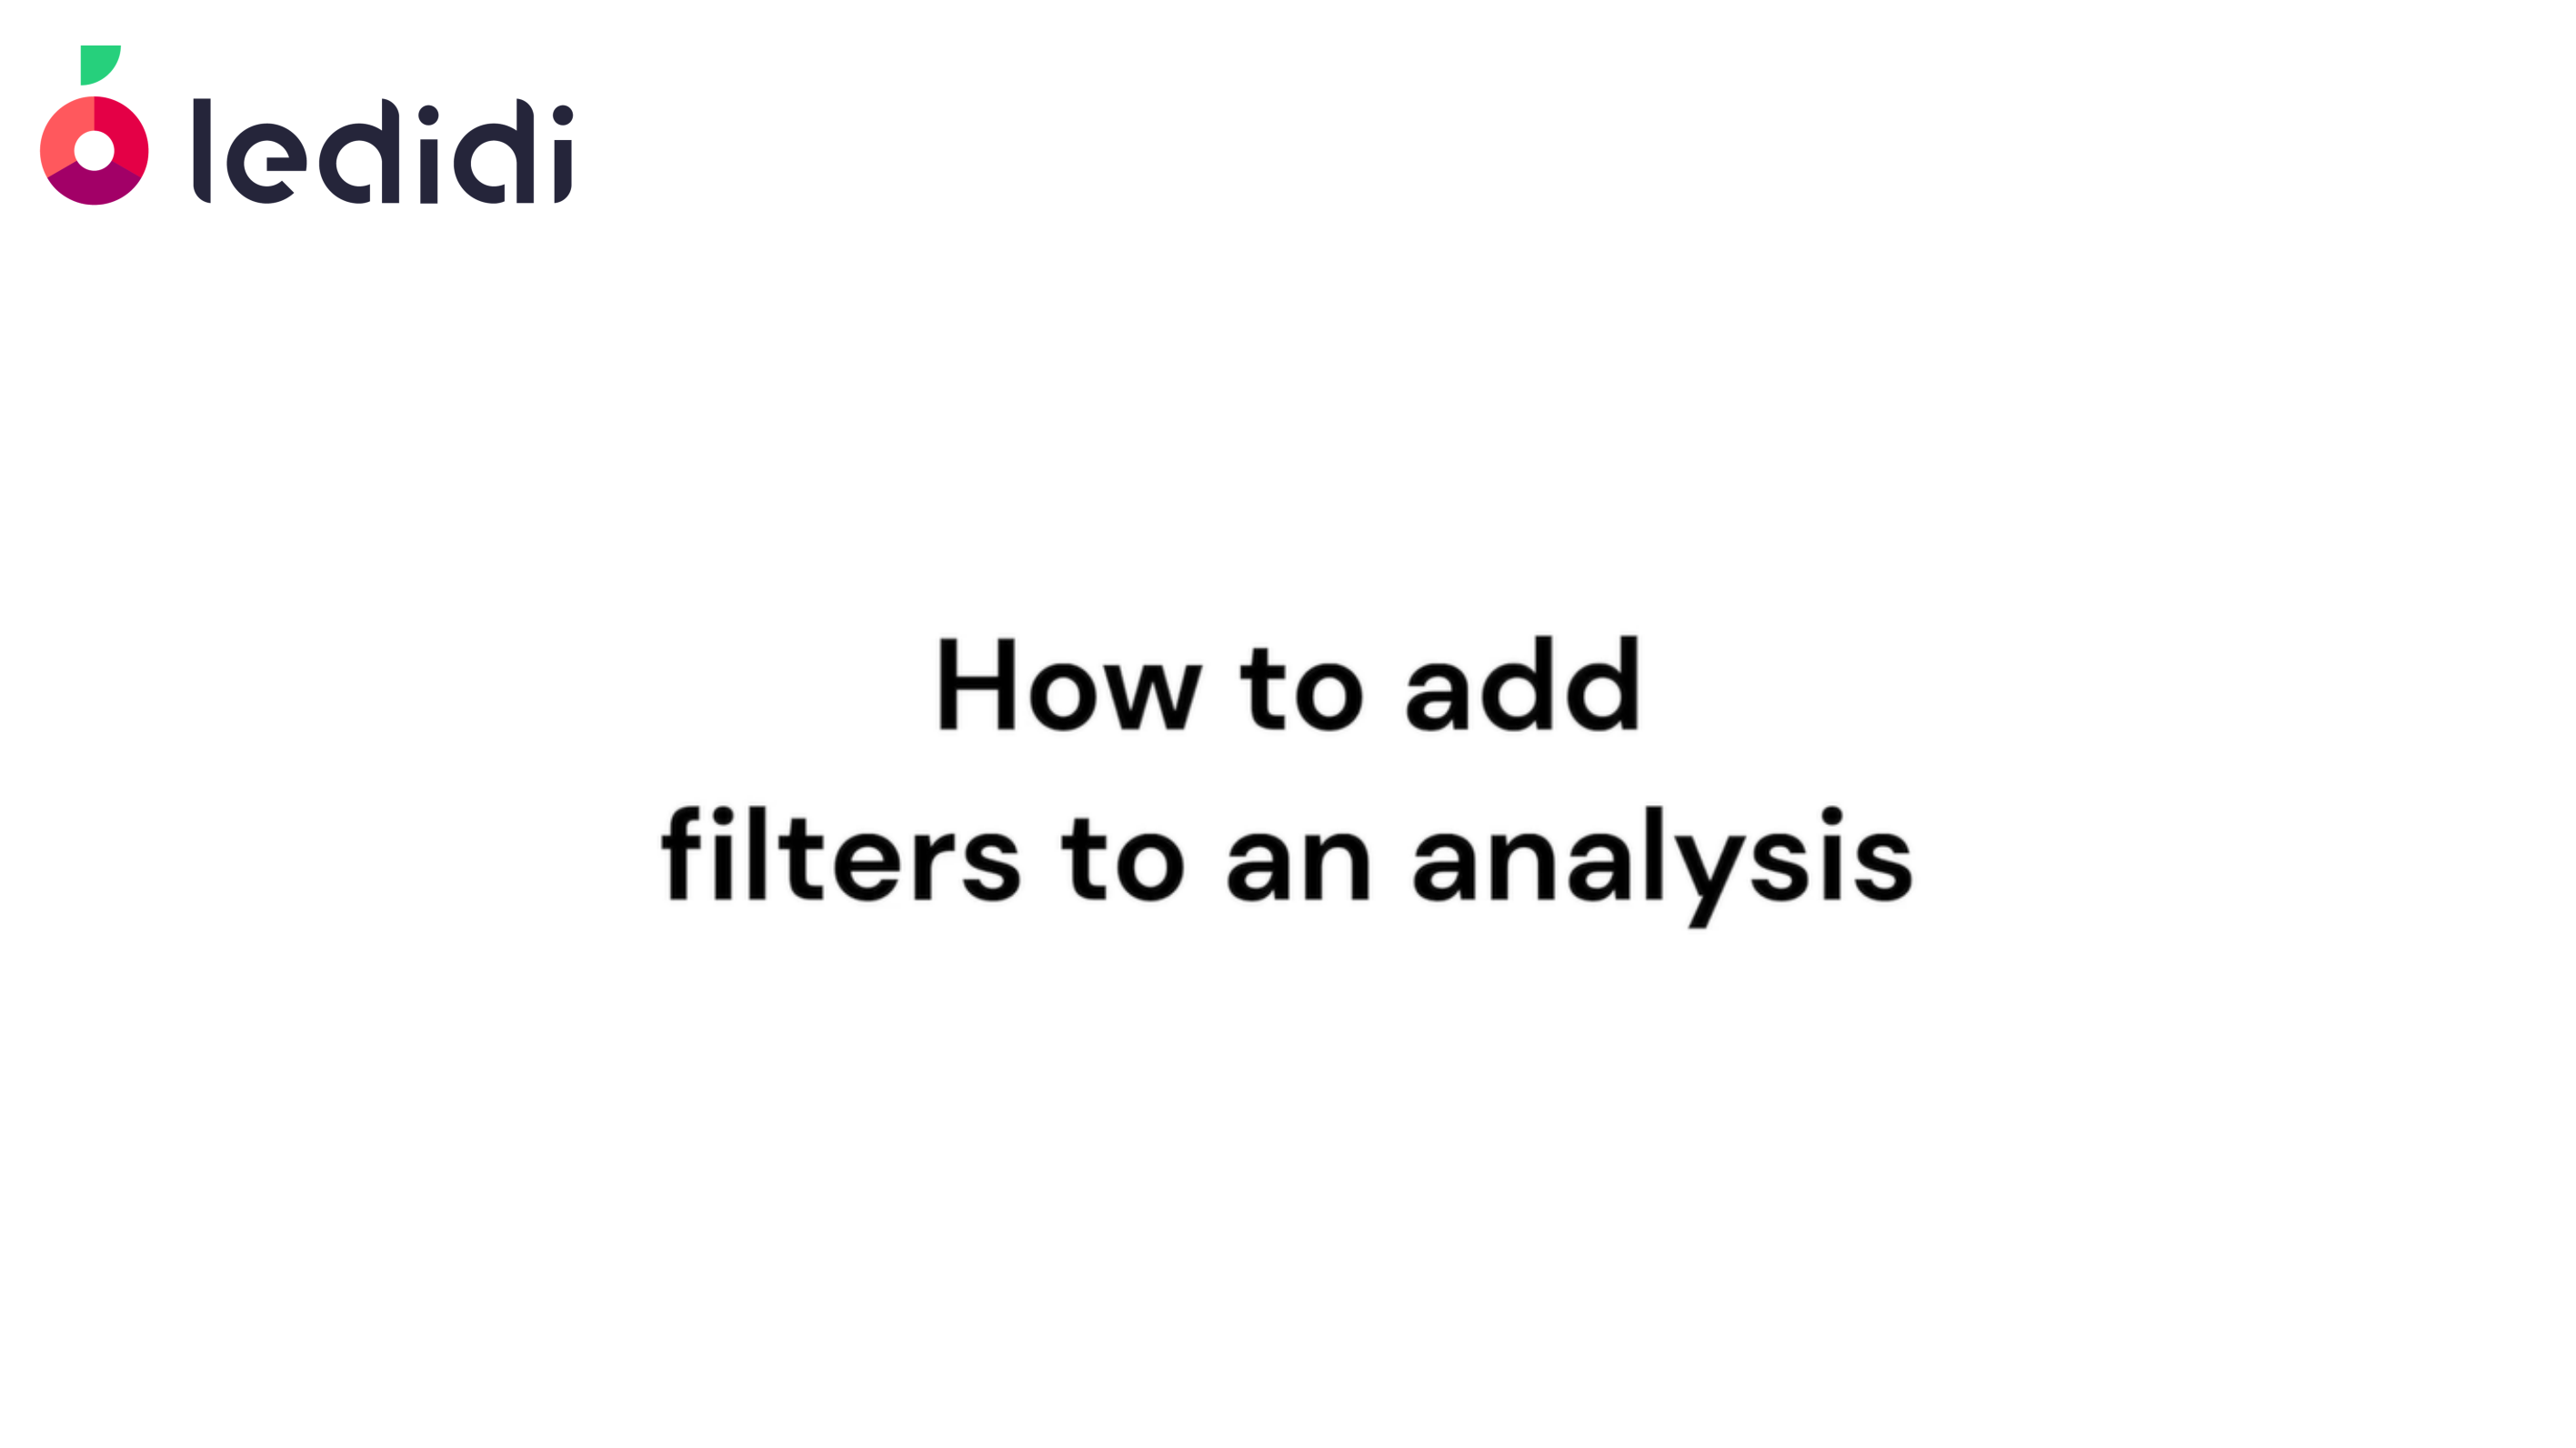 How to add filters to an analysis